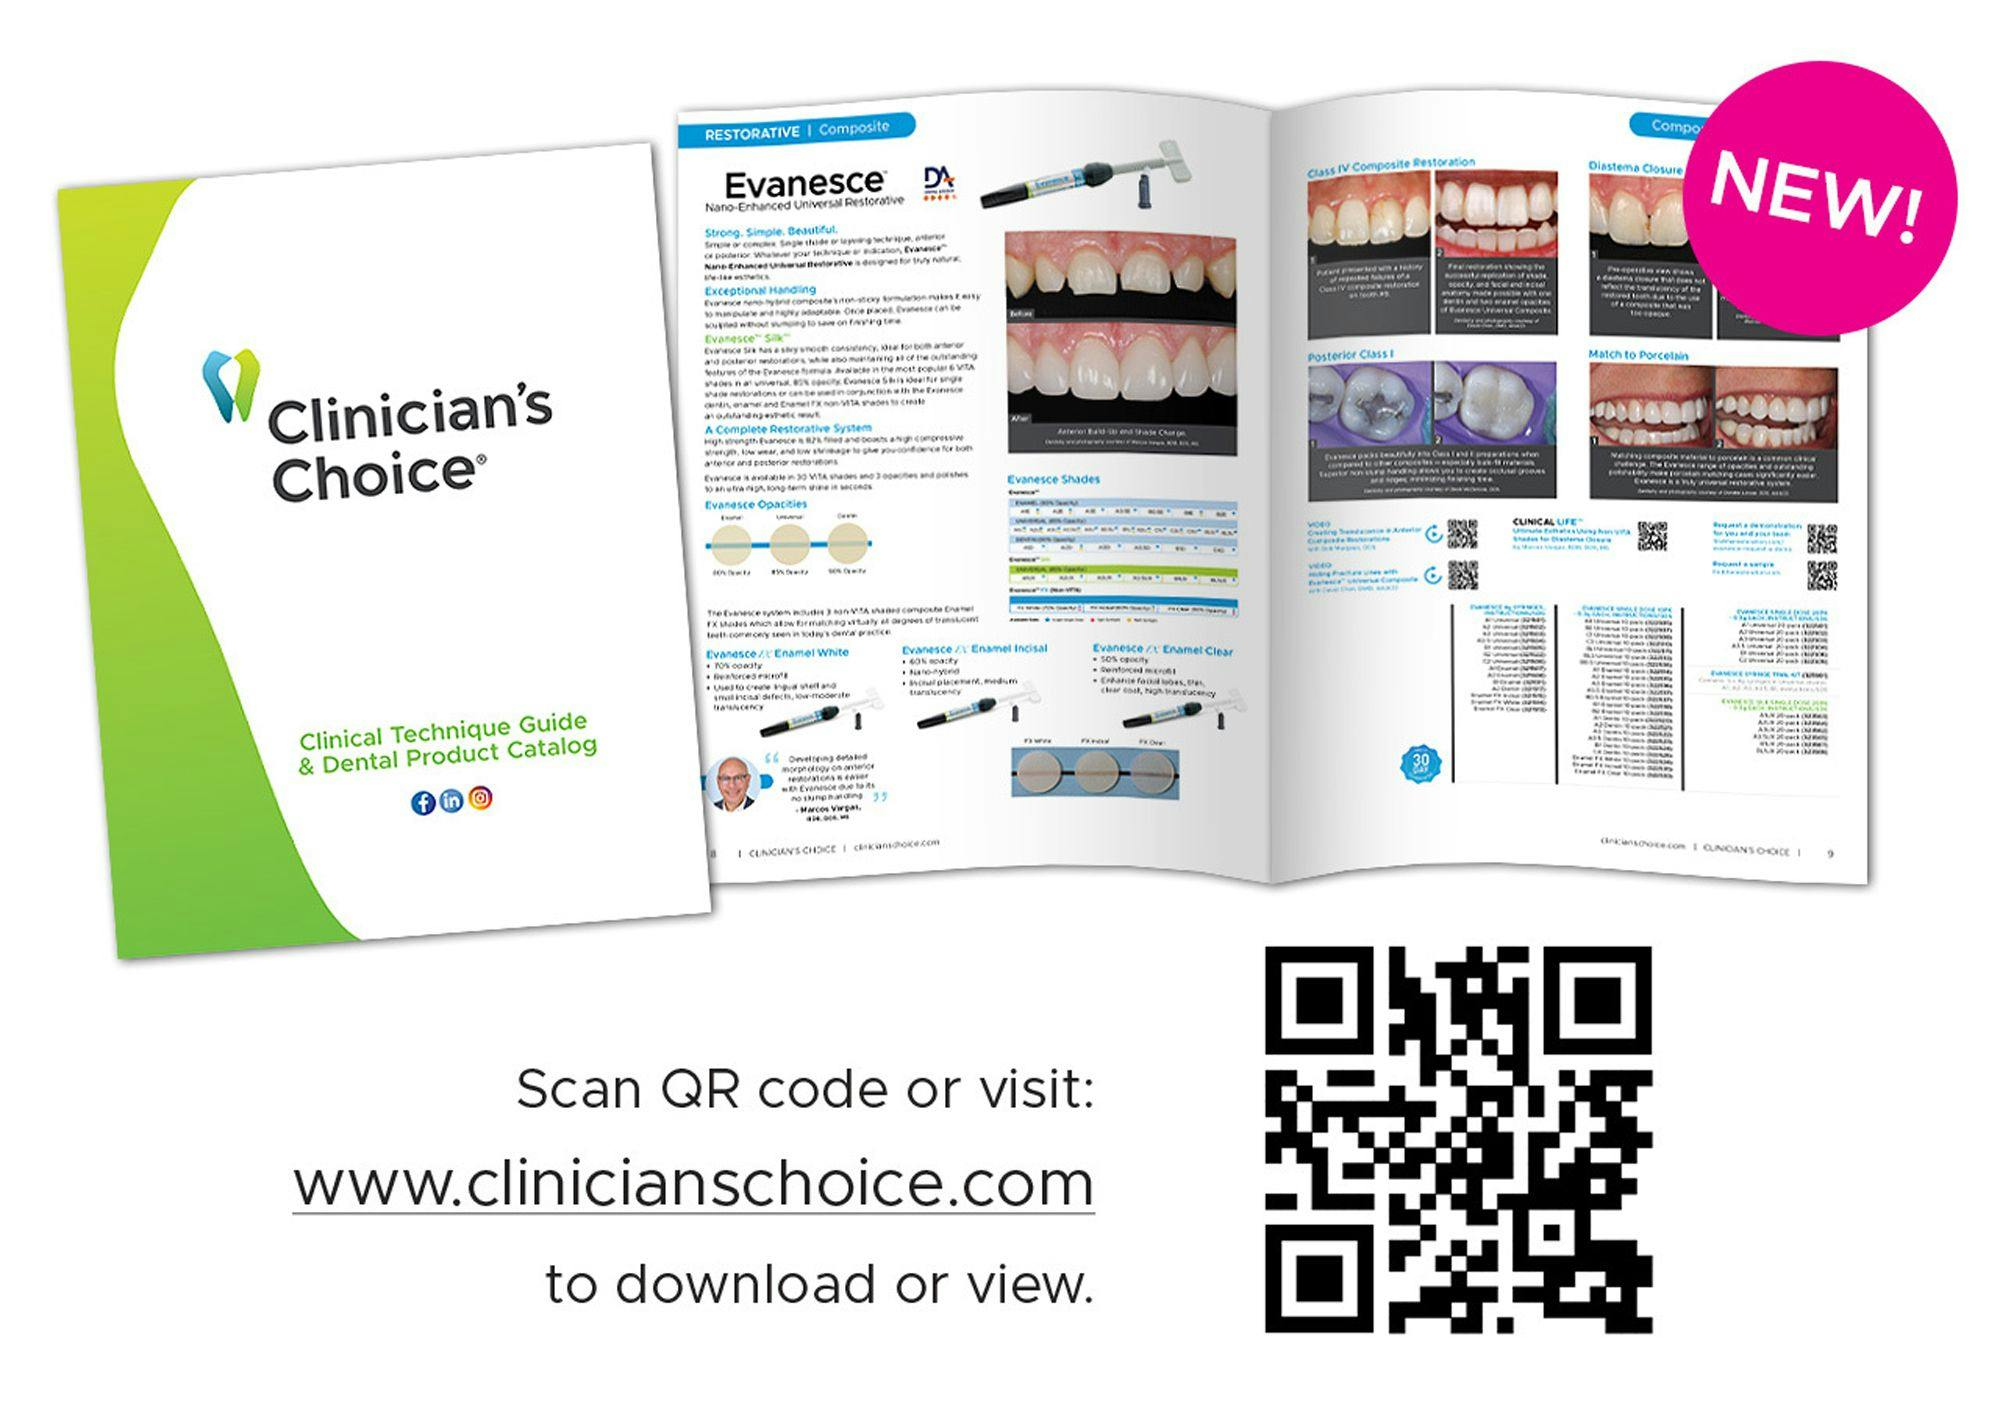 Clinician's Choice Launches 2022-2023 Clinical Technique Guide & Dental Product Catalog